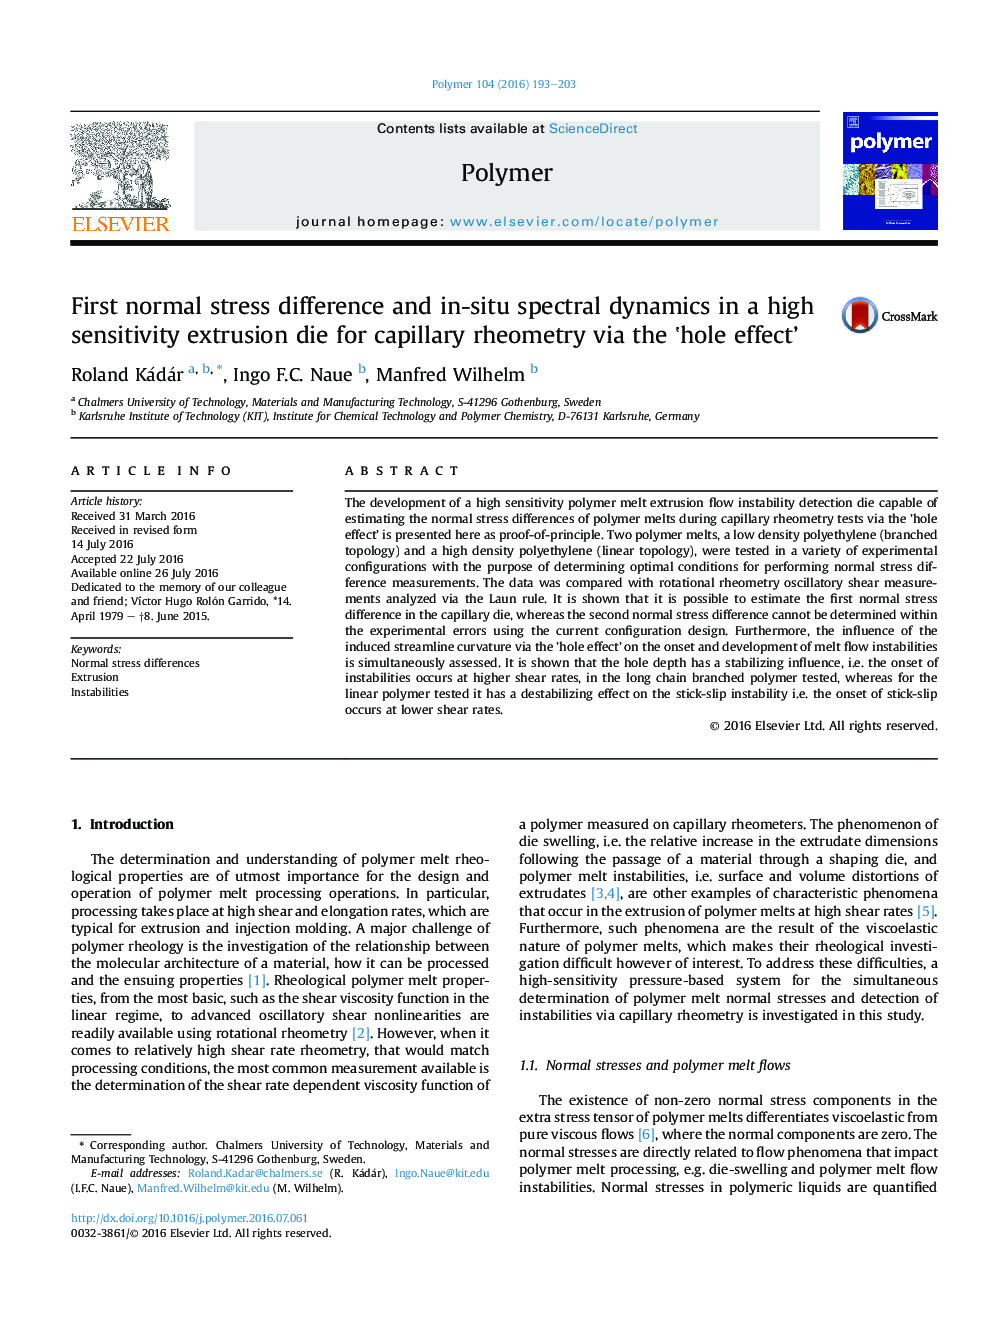 First normal stress difference and in-situ spectral dynamics in a high sensitivity extrusion die for capillary rheometry via the Ê½hole effect'